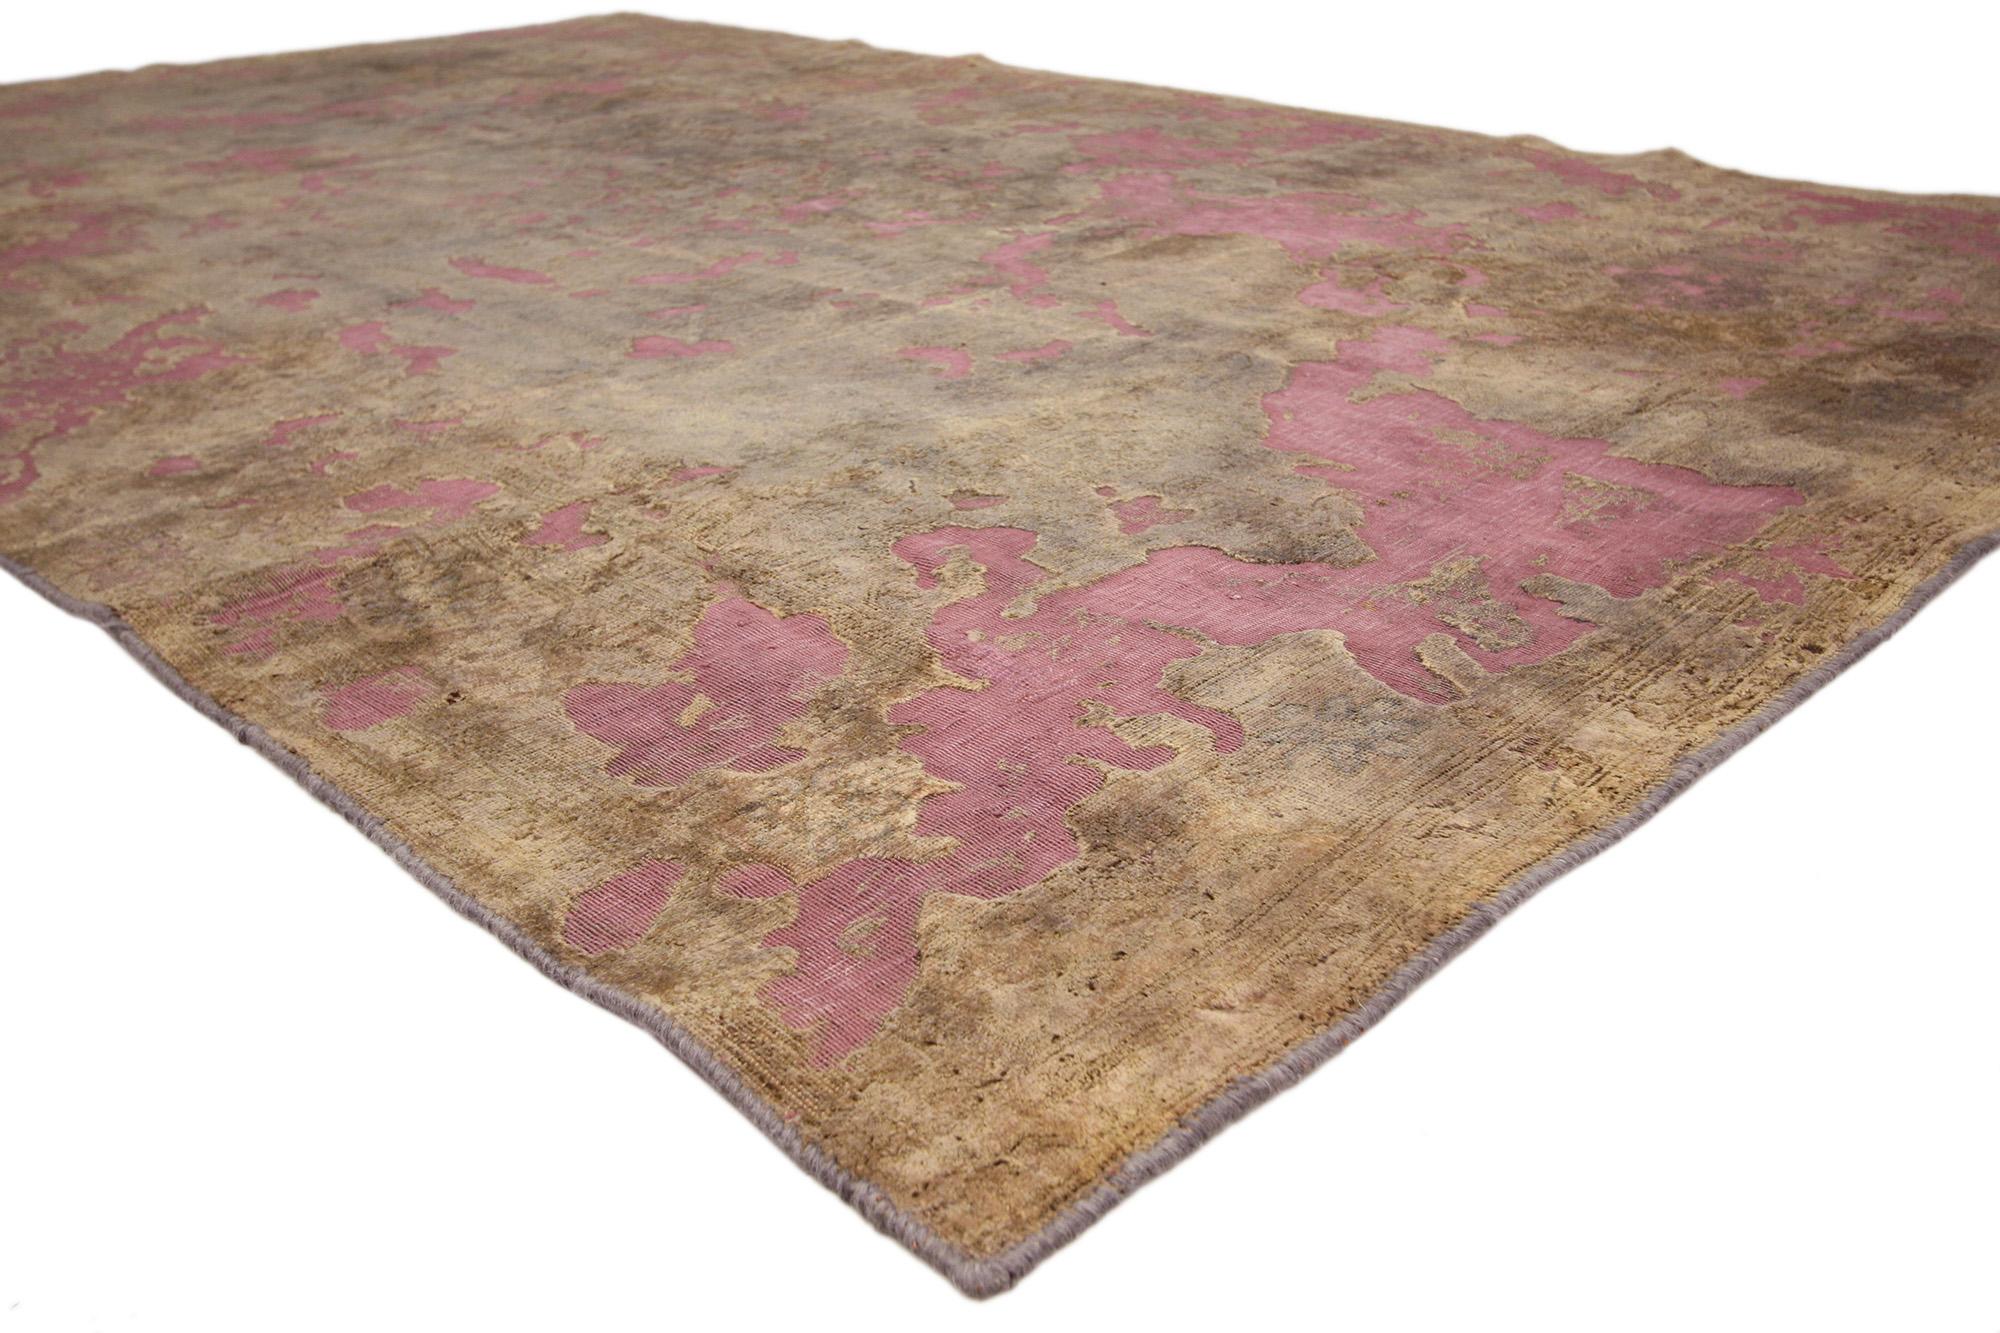 60730 Vintage Turkish Overdyed Rug, 06’06 x 10’00. 
Prepare to be swept off your feet as Industrial Chic twirls with the softer side of Abstract Expressionism in this hand-knotted wool vintage Turkish overdyed rug. It's not just a rug; it's a design